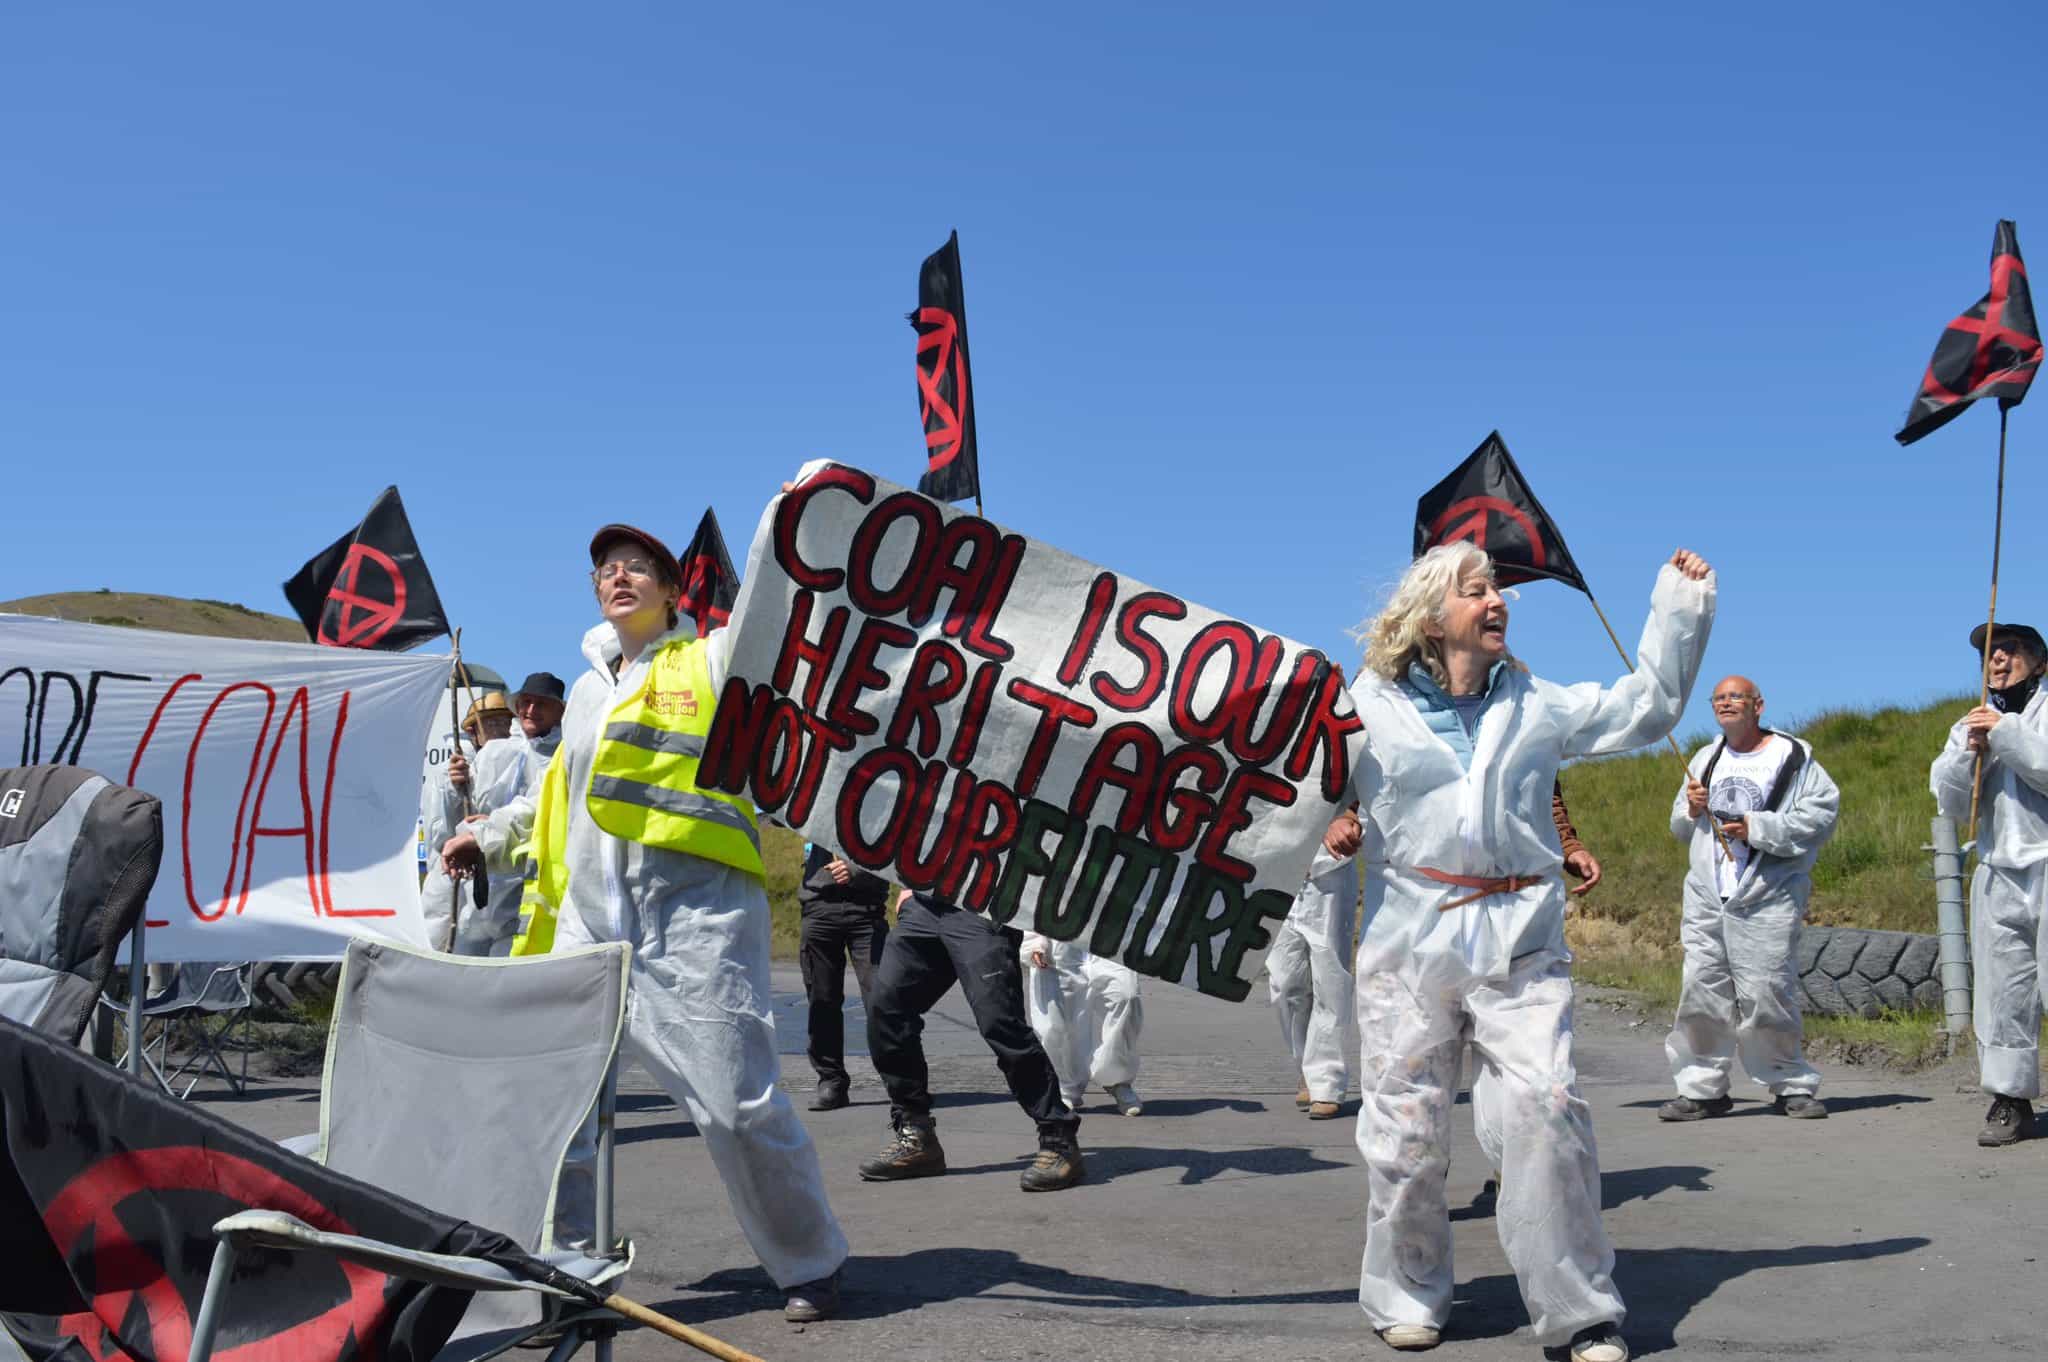 Rebels cheer outside the mine and hold a banner that says: Coal is our heritage not our future